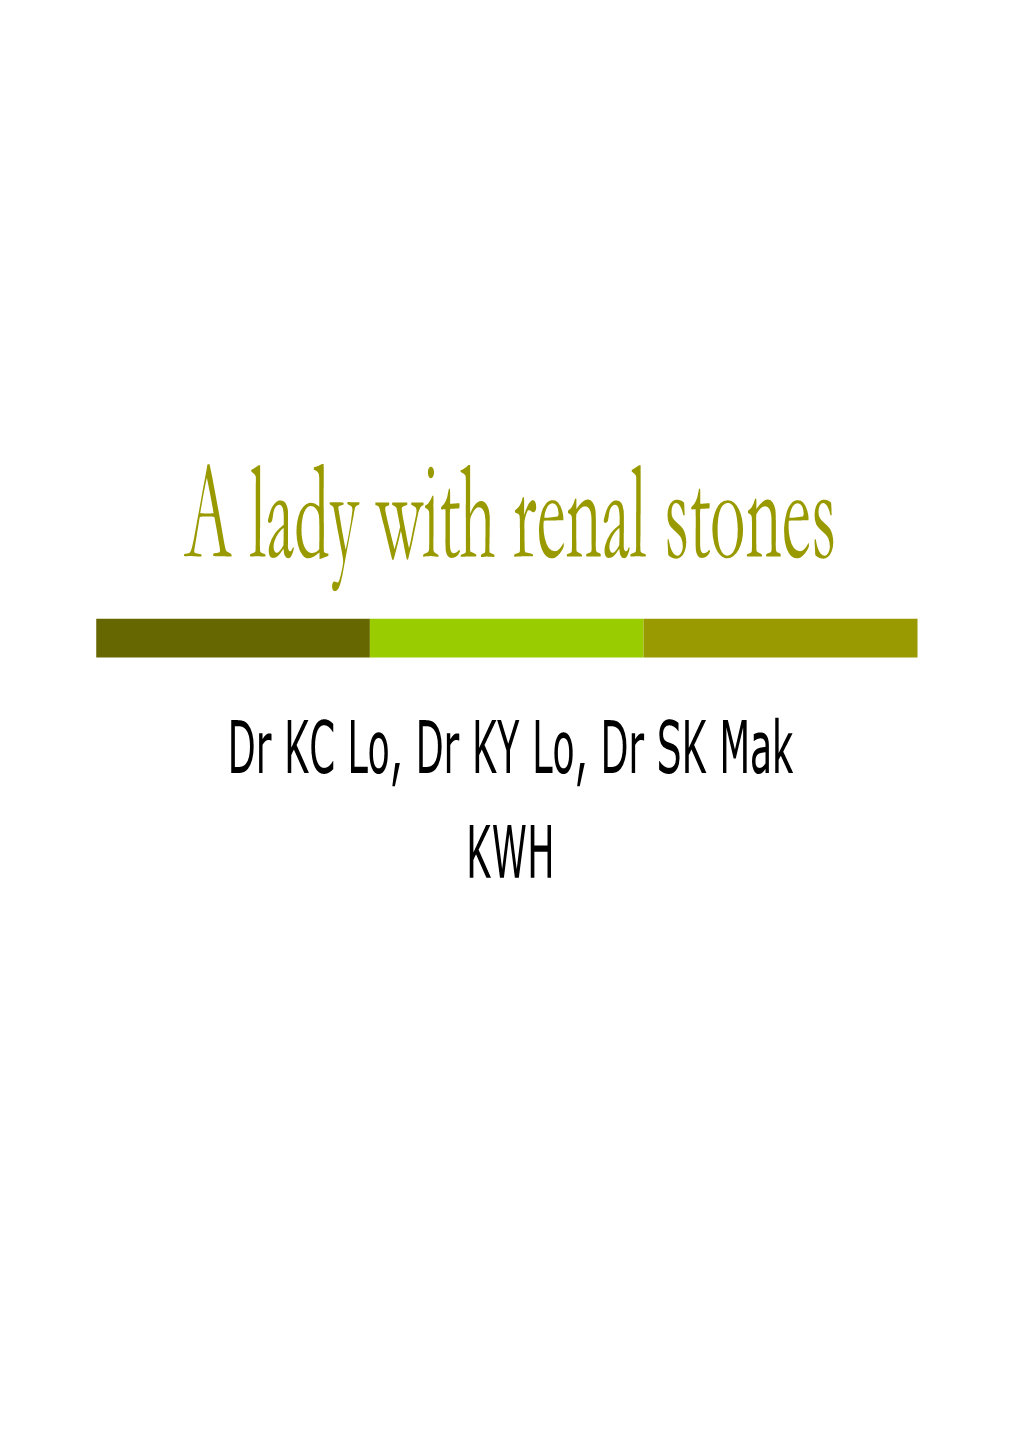 A Lady with Renal Stones